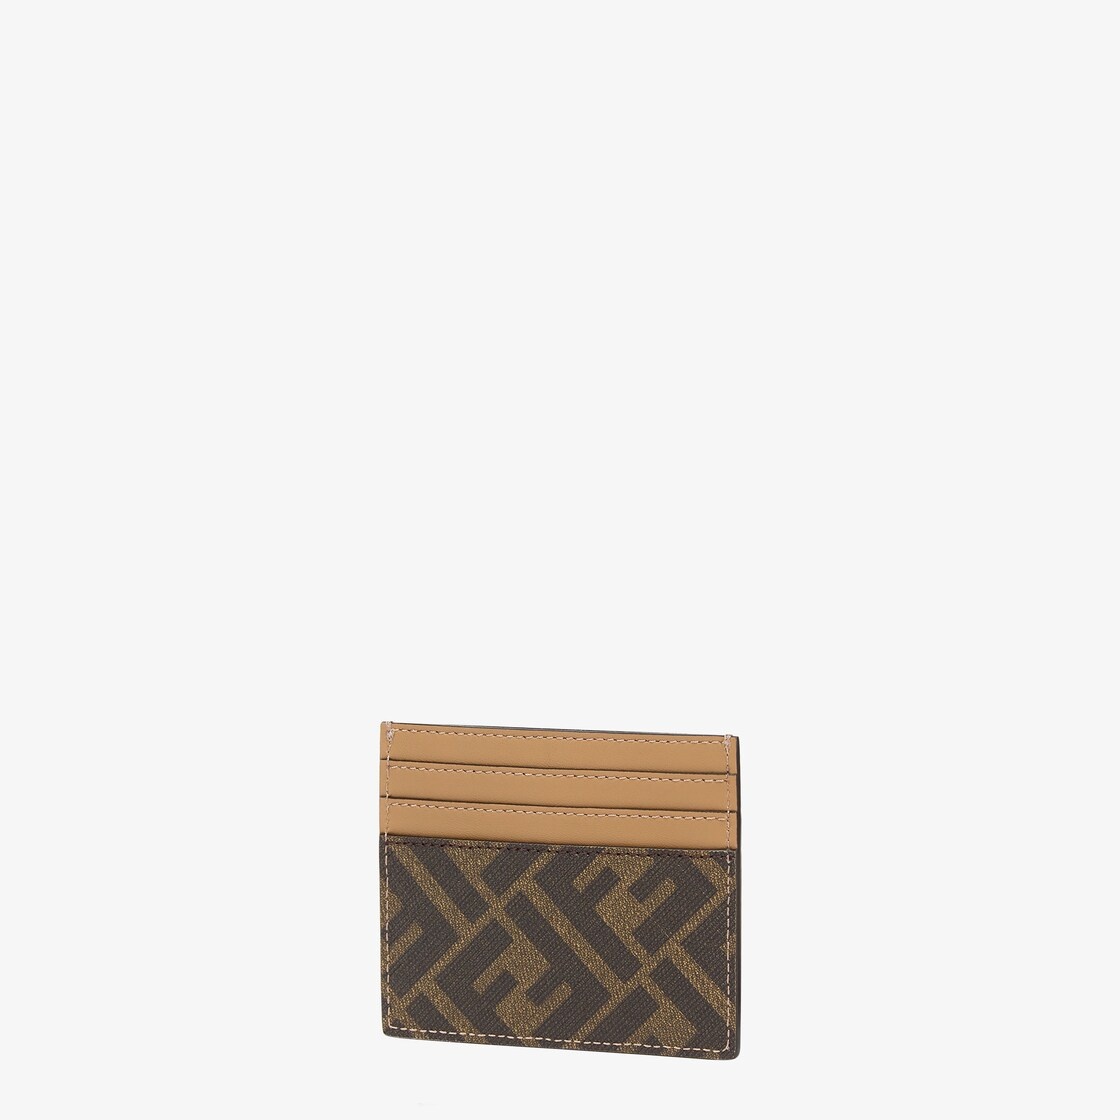 Card holder with six slots and flat central pocket. Made of textured fabric with FF motif in brown a - 2